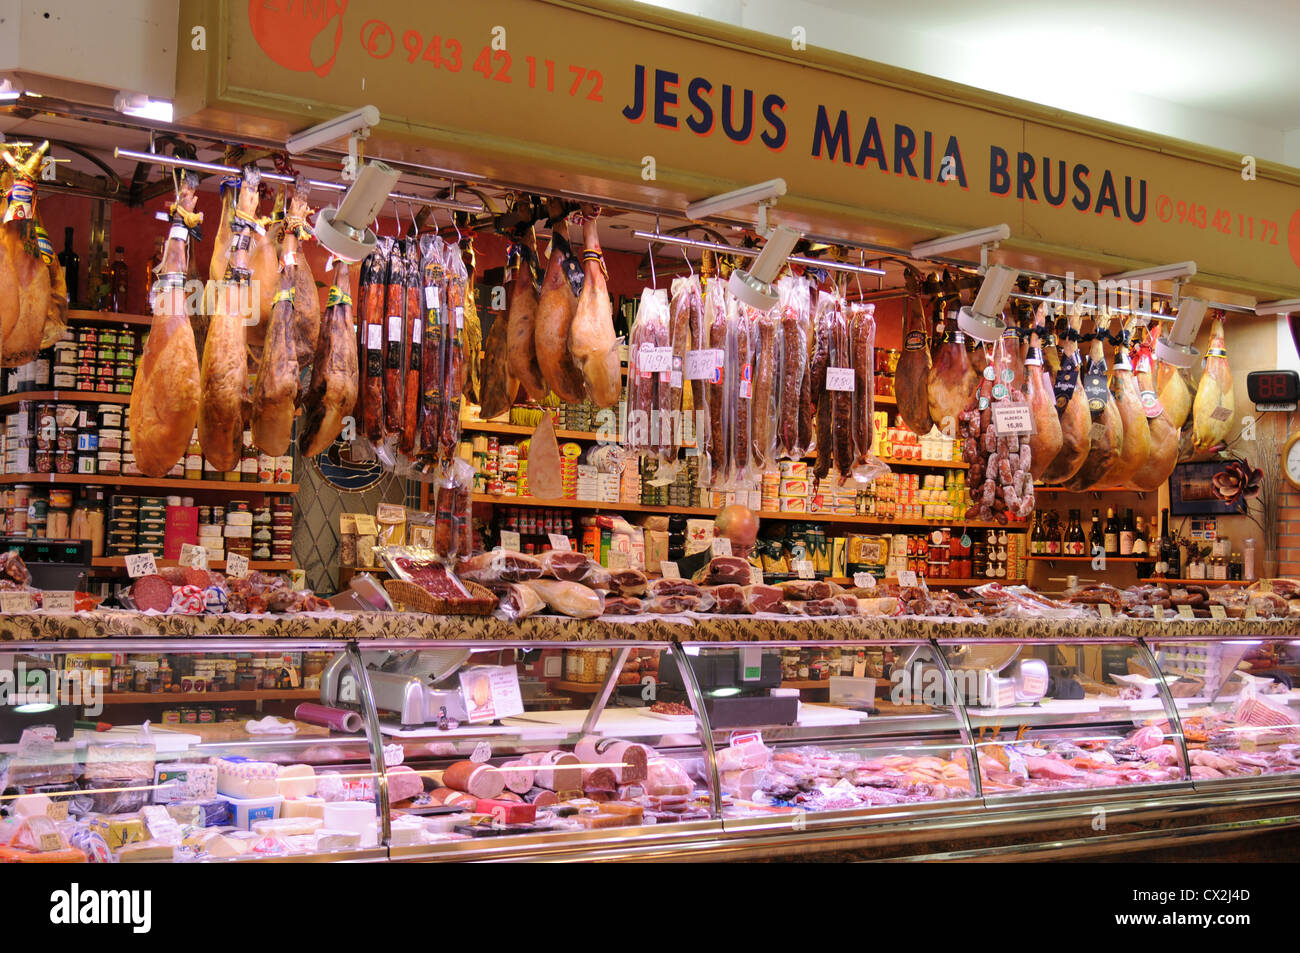 Charcuterie stall in the market in the Northern Spanish town of San Sebastian Stock Photo